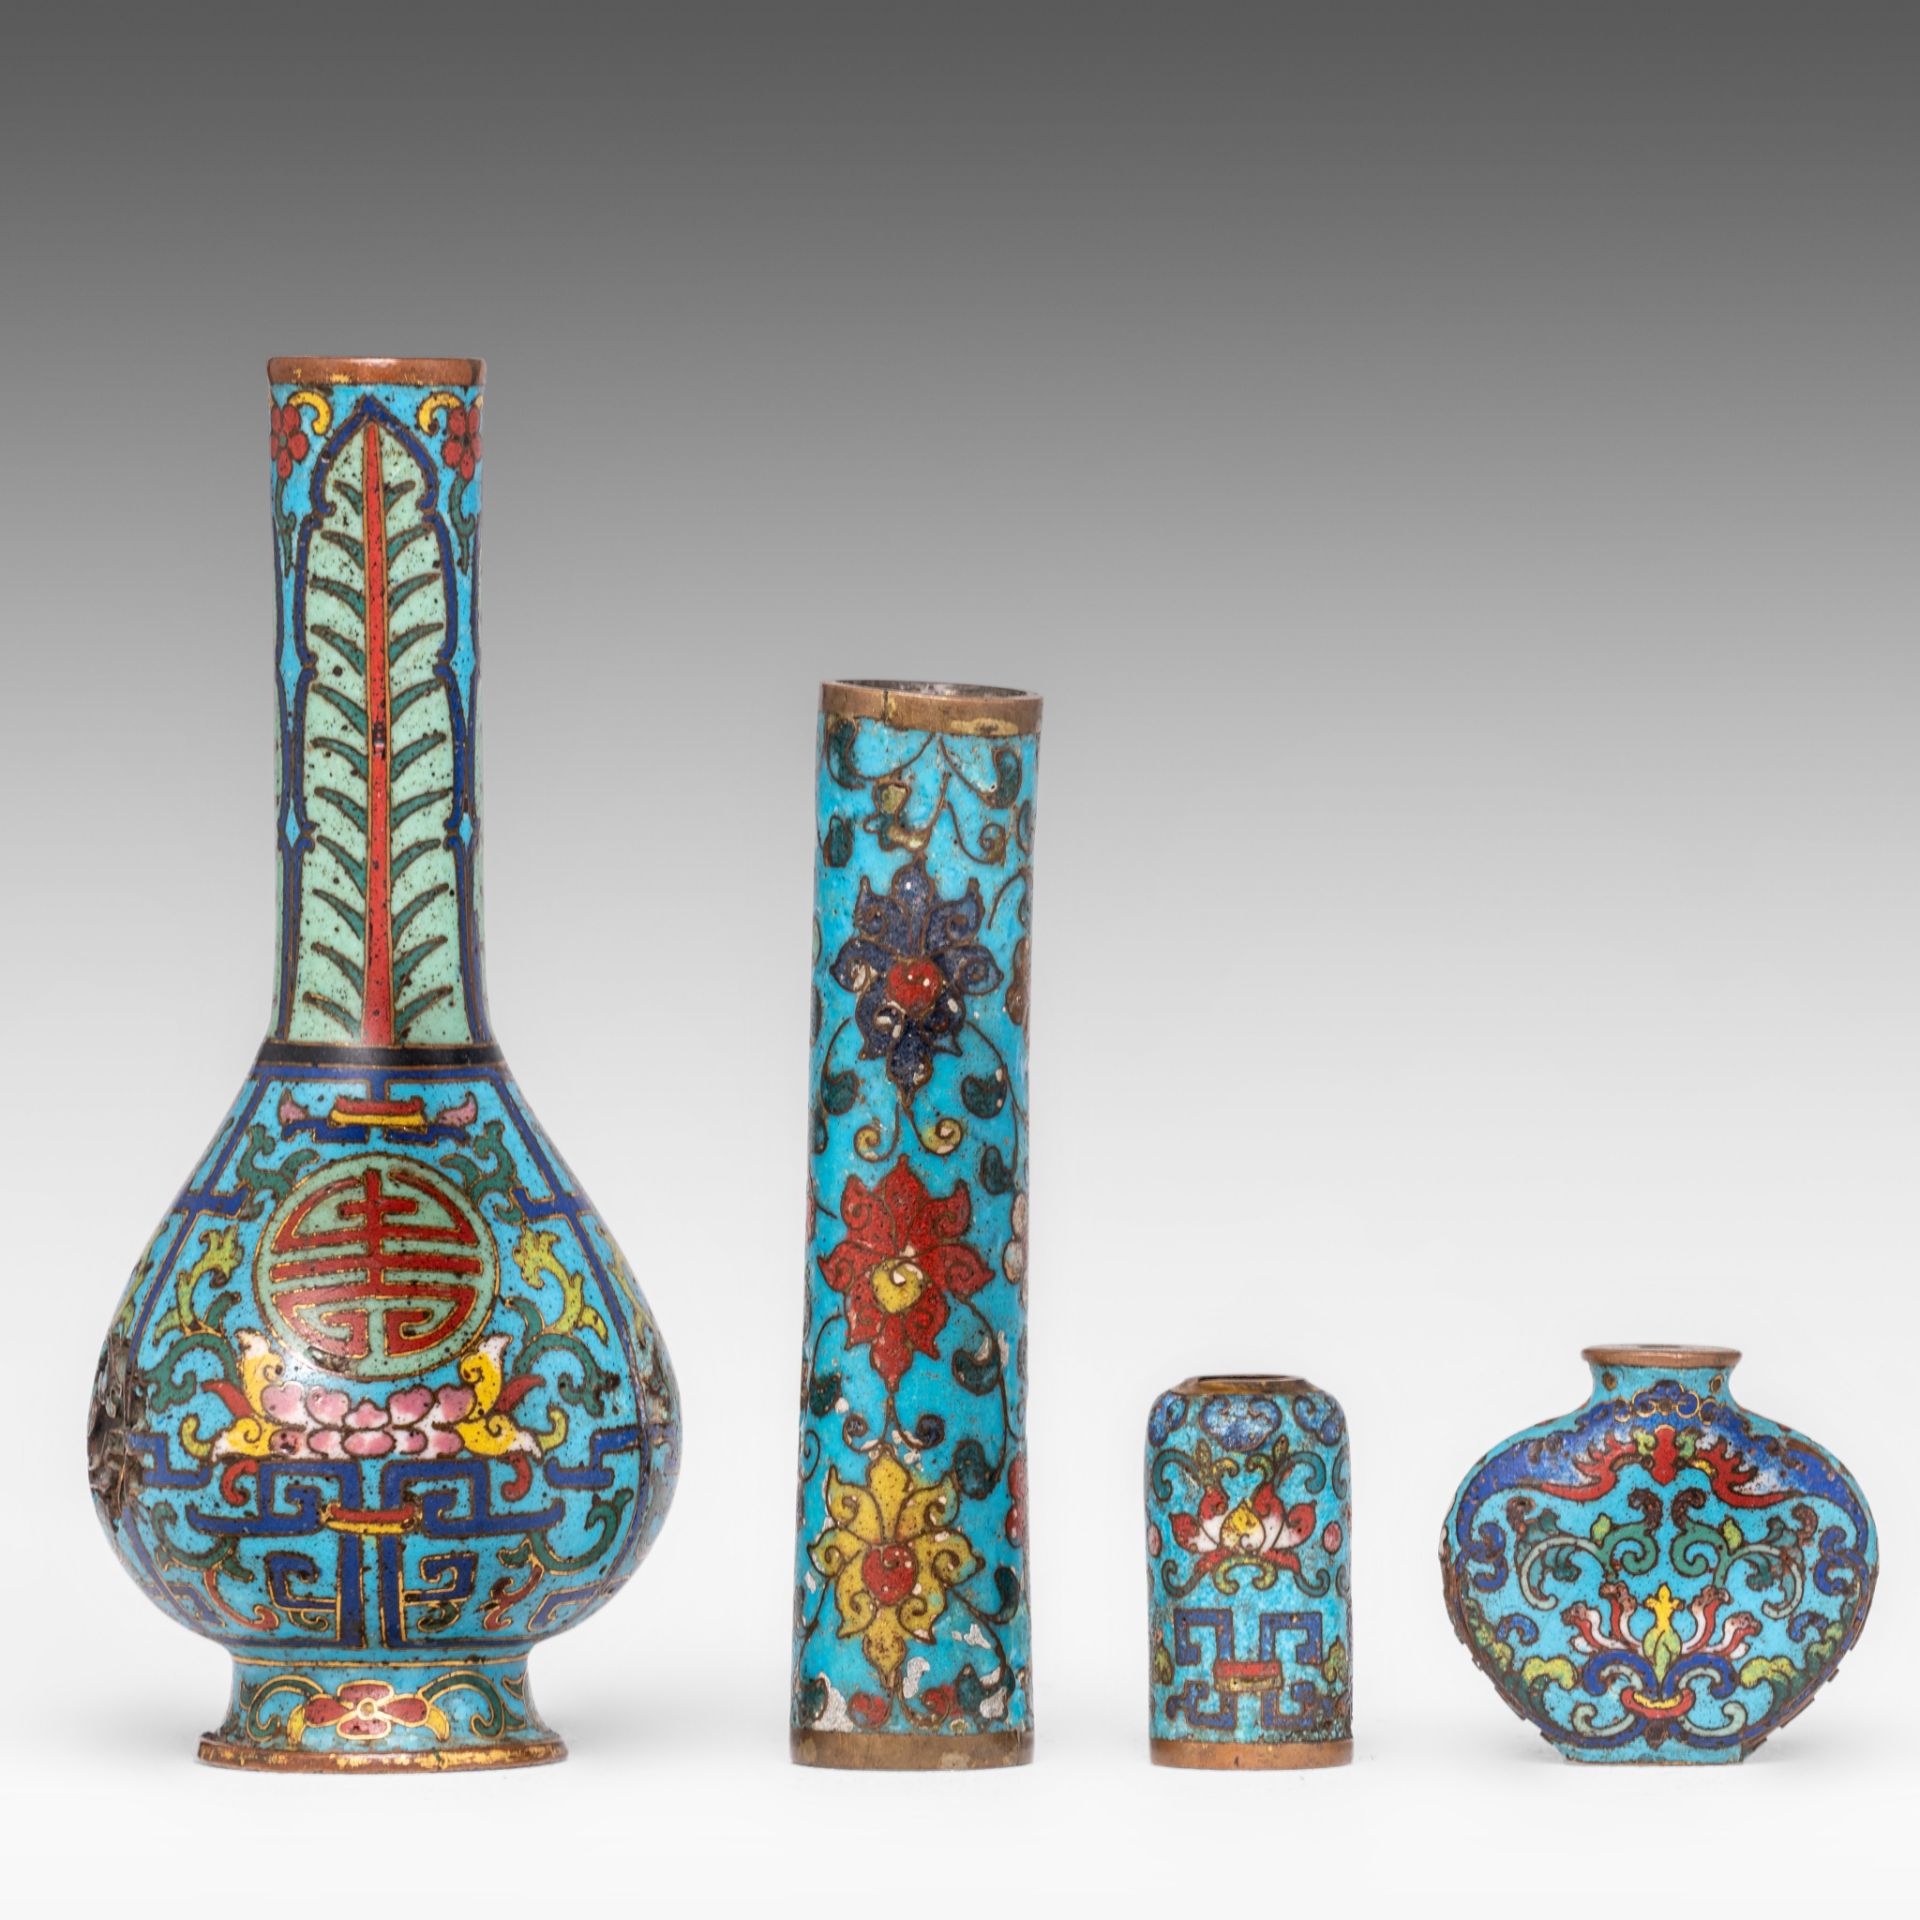 A collection of Chinese cloisonne enamel miniature vases, tallest H 18 cm